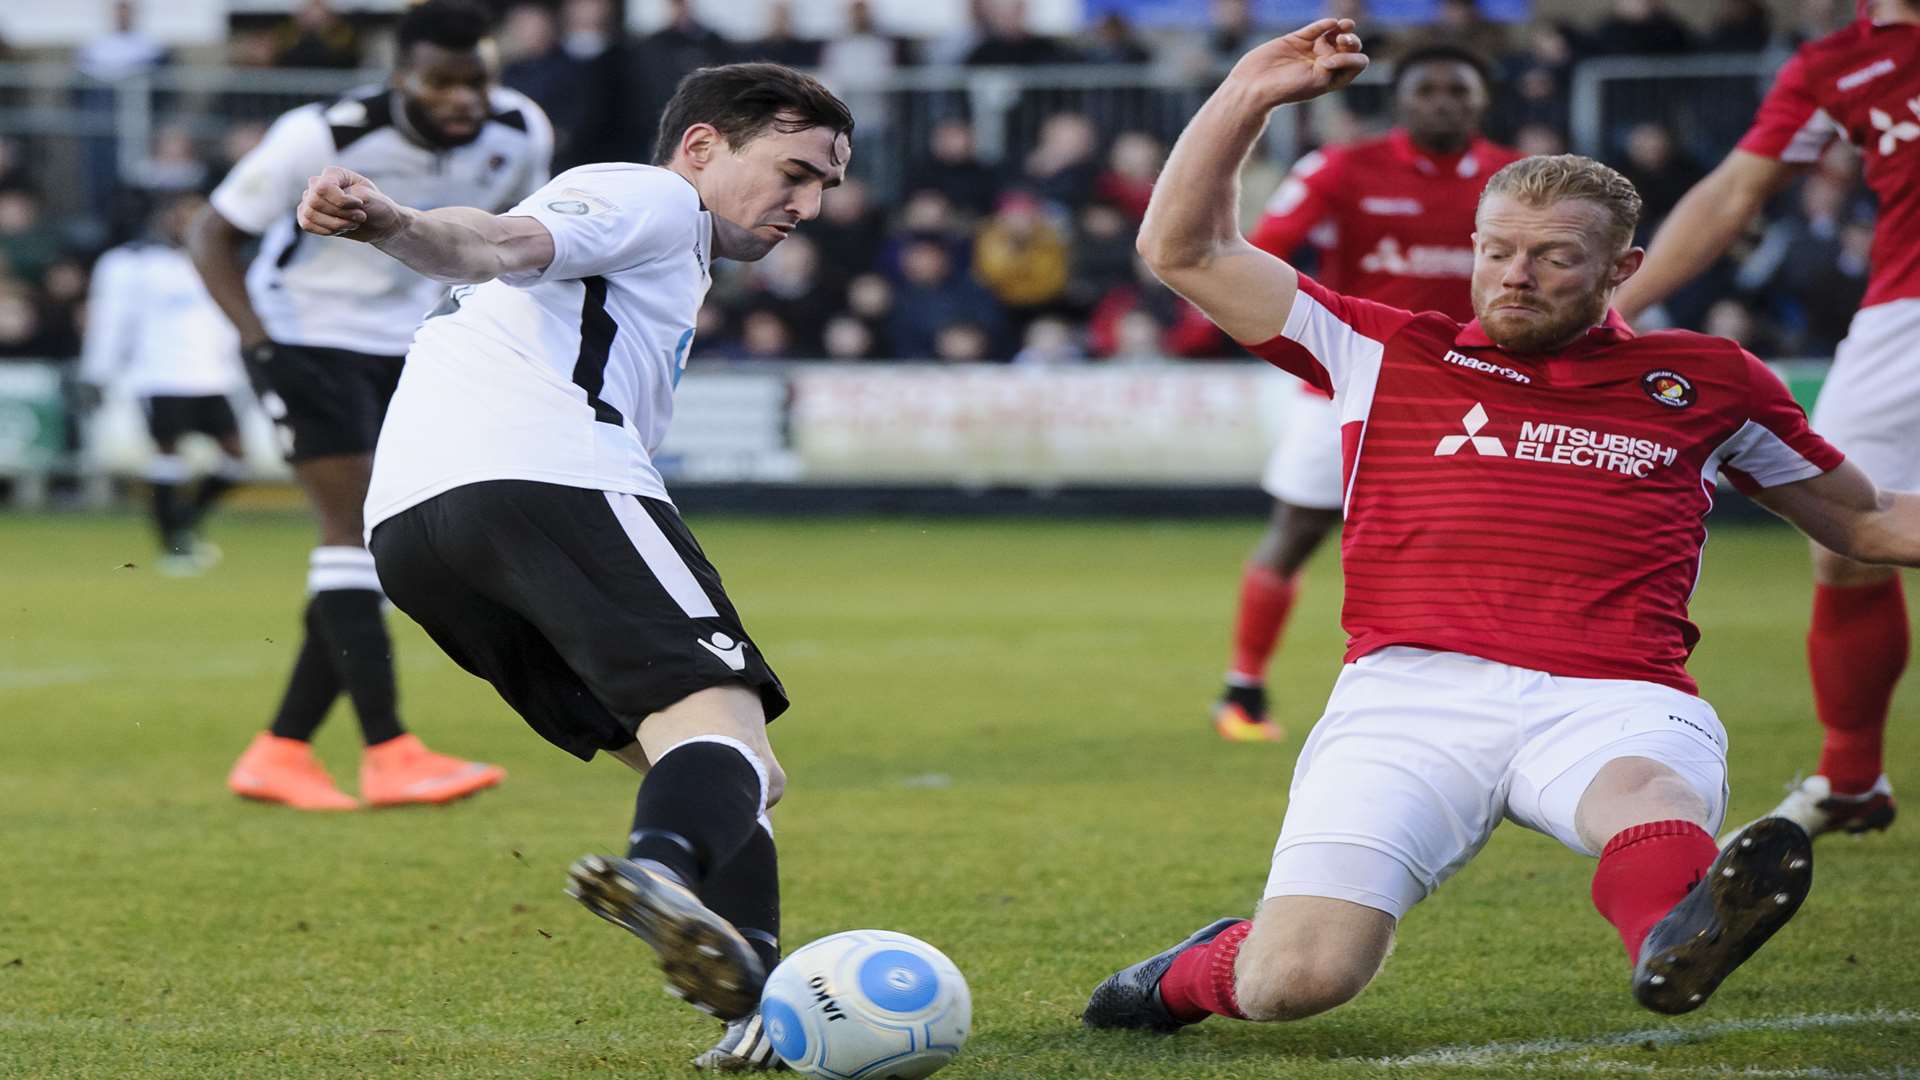 Dartford's Danny Harris on the ball as Fleet's Kenny Clark slides in. Picture: Andy Payton